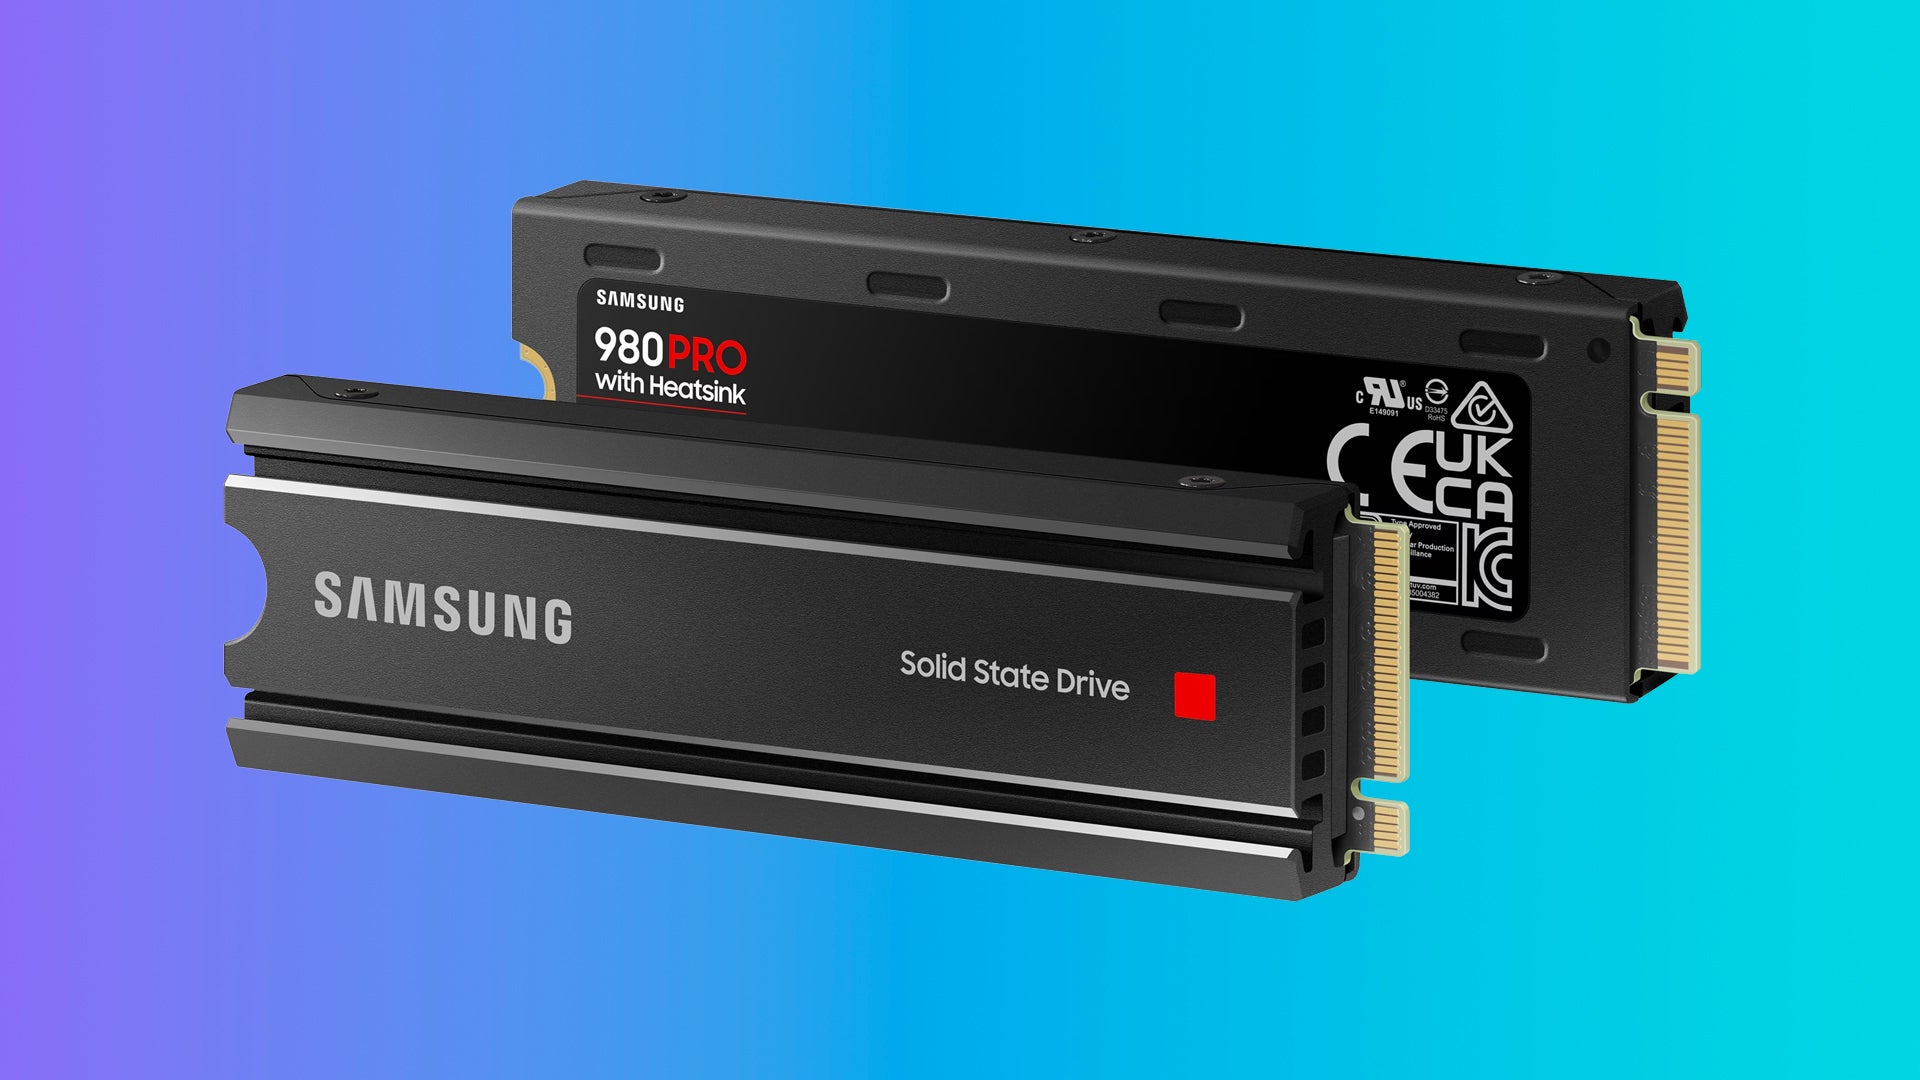 Upgrade your PS5 with this 1TB Samsung SSD for just £67